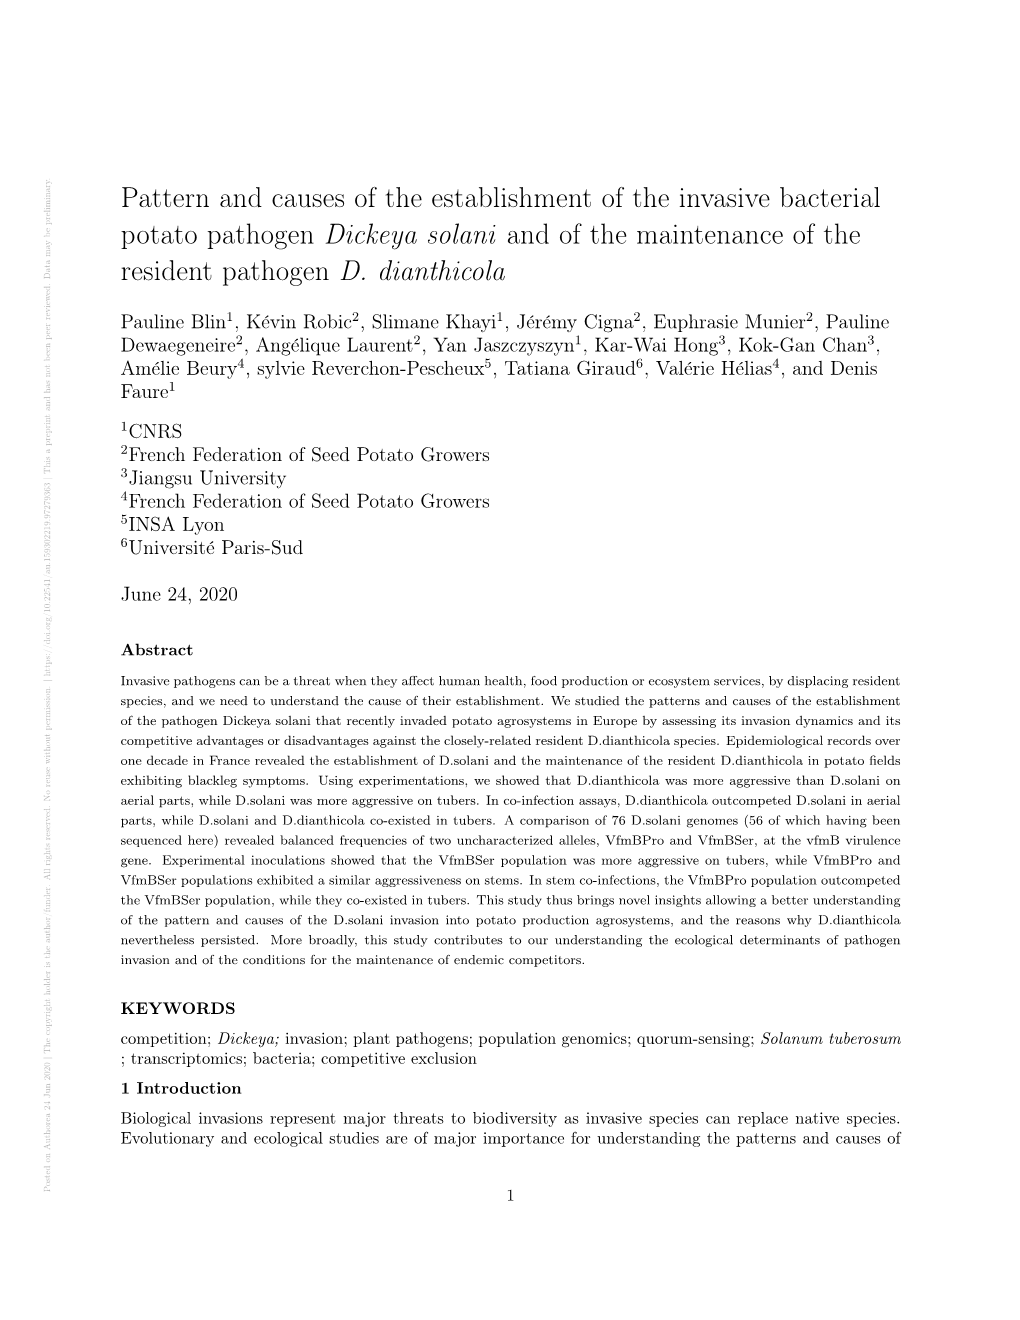 Pattern and Causes of the Establishment of the Invasive Bacterial Potato Pathogen Dickeya Solani and of the Maintenance of the R